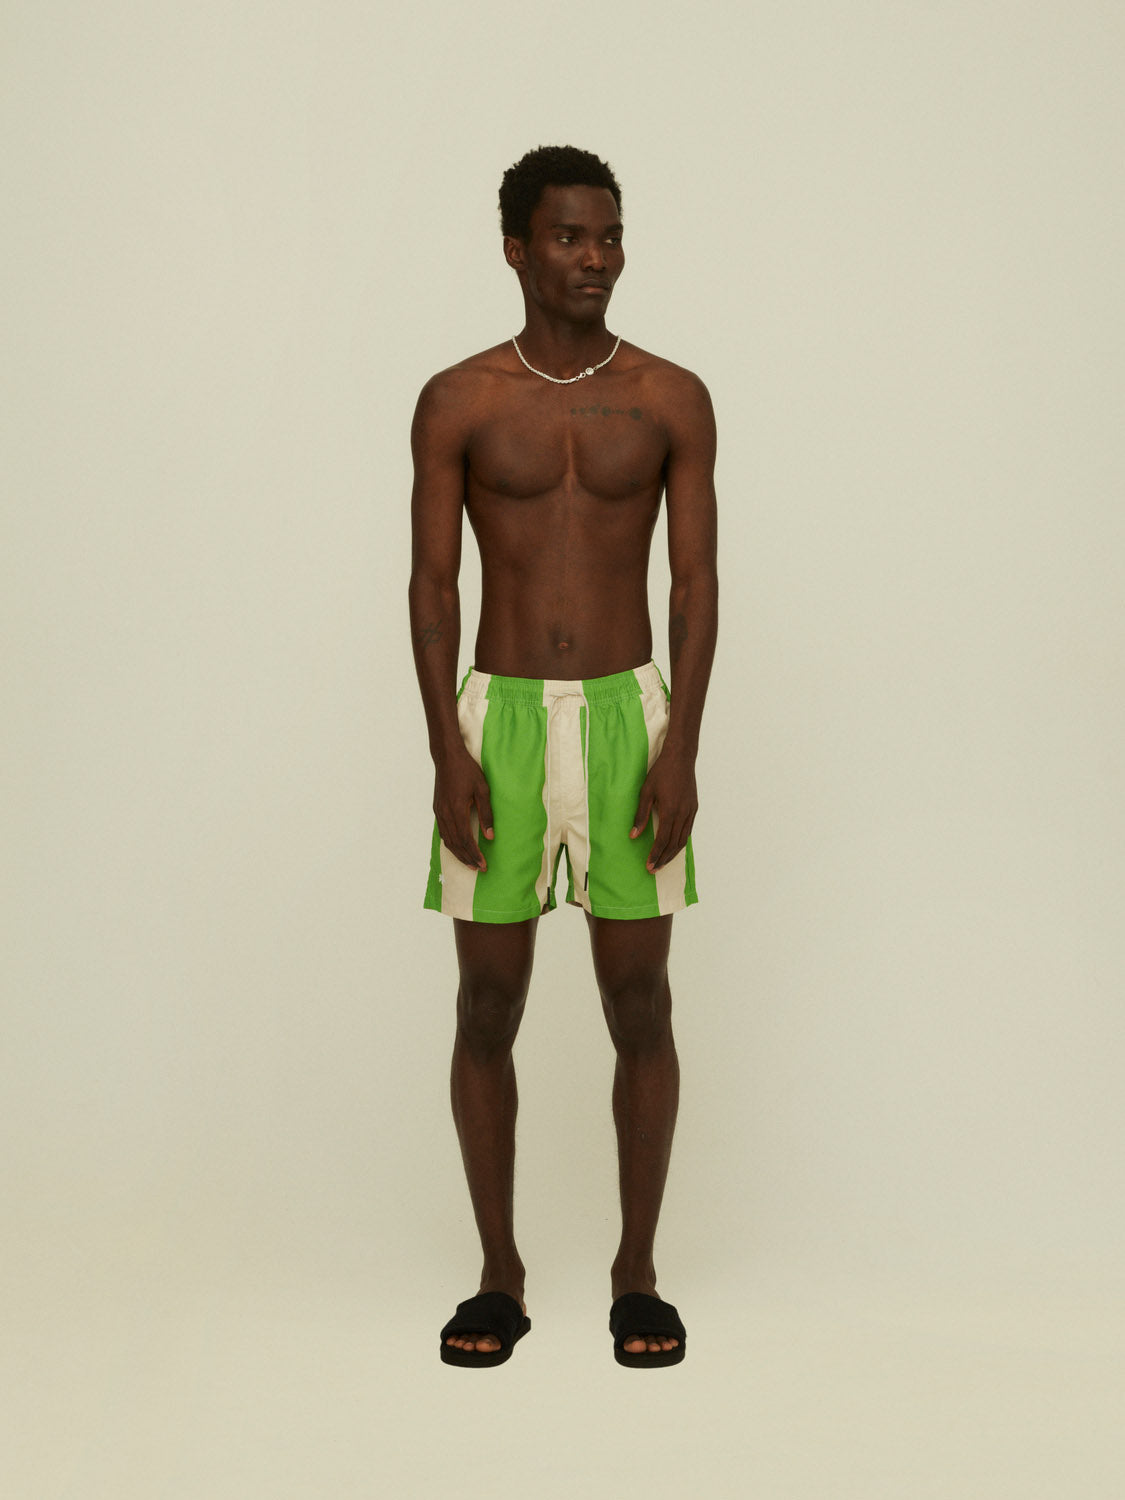 OAS Quick Drying Swim Shorts with Four Pockets